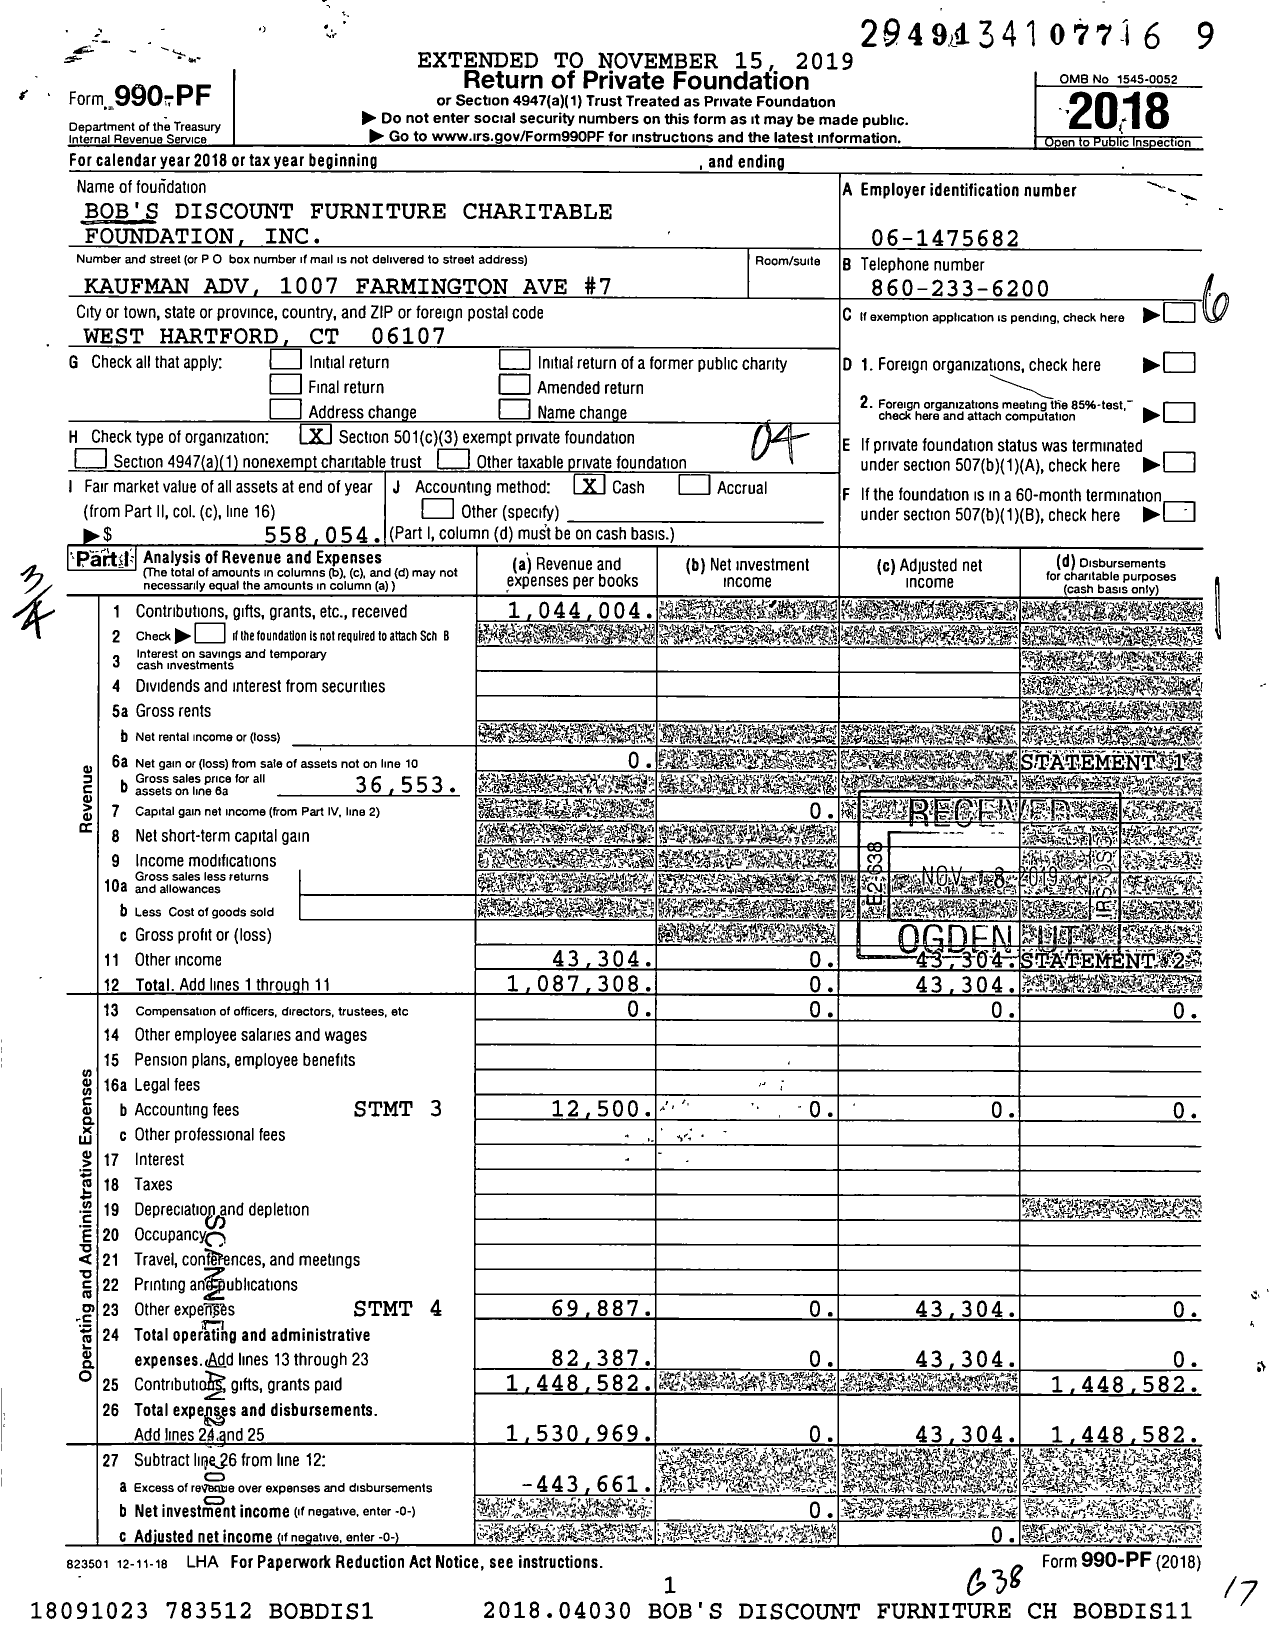 Image of first page of 2018 Form 990PF for Bob's Discount Furniture Charitable Foundation